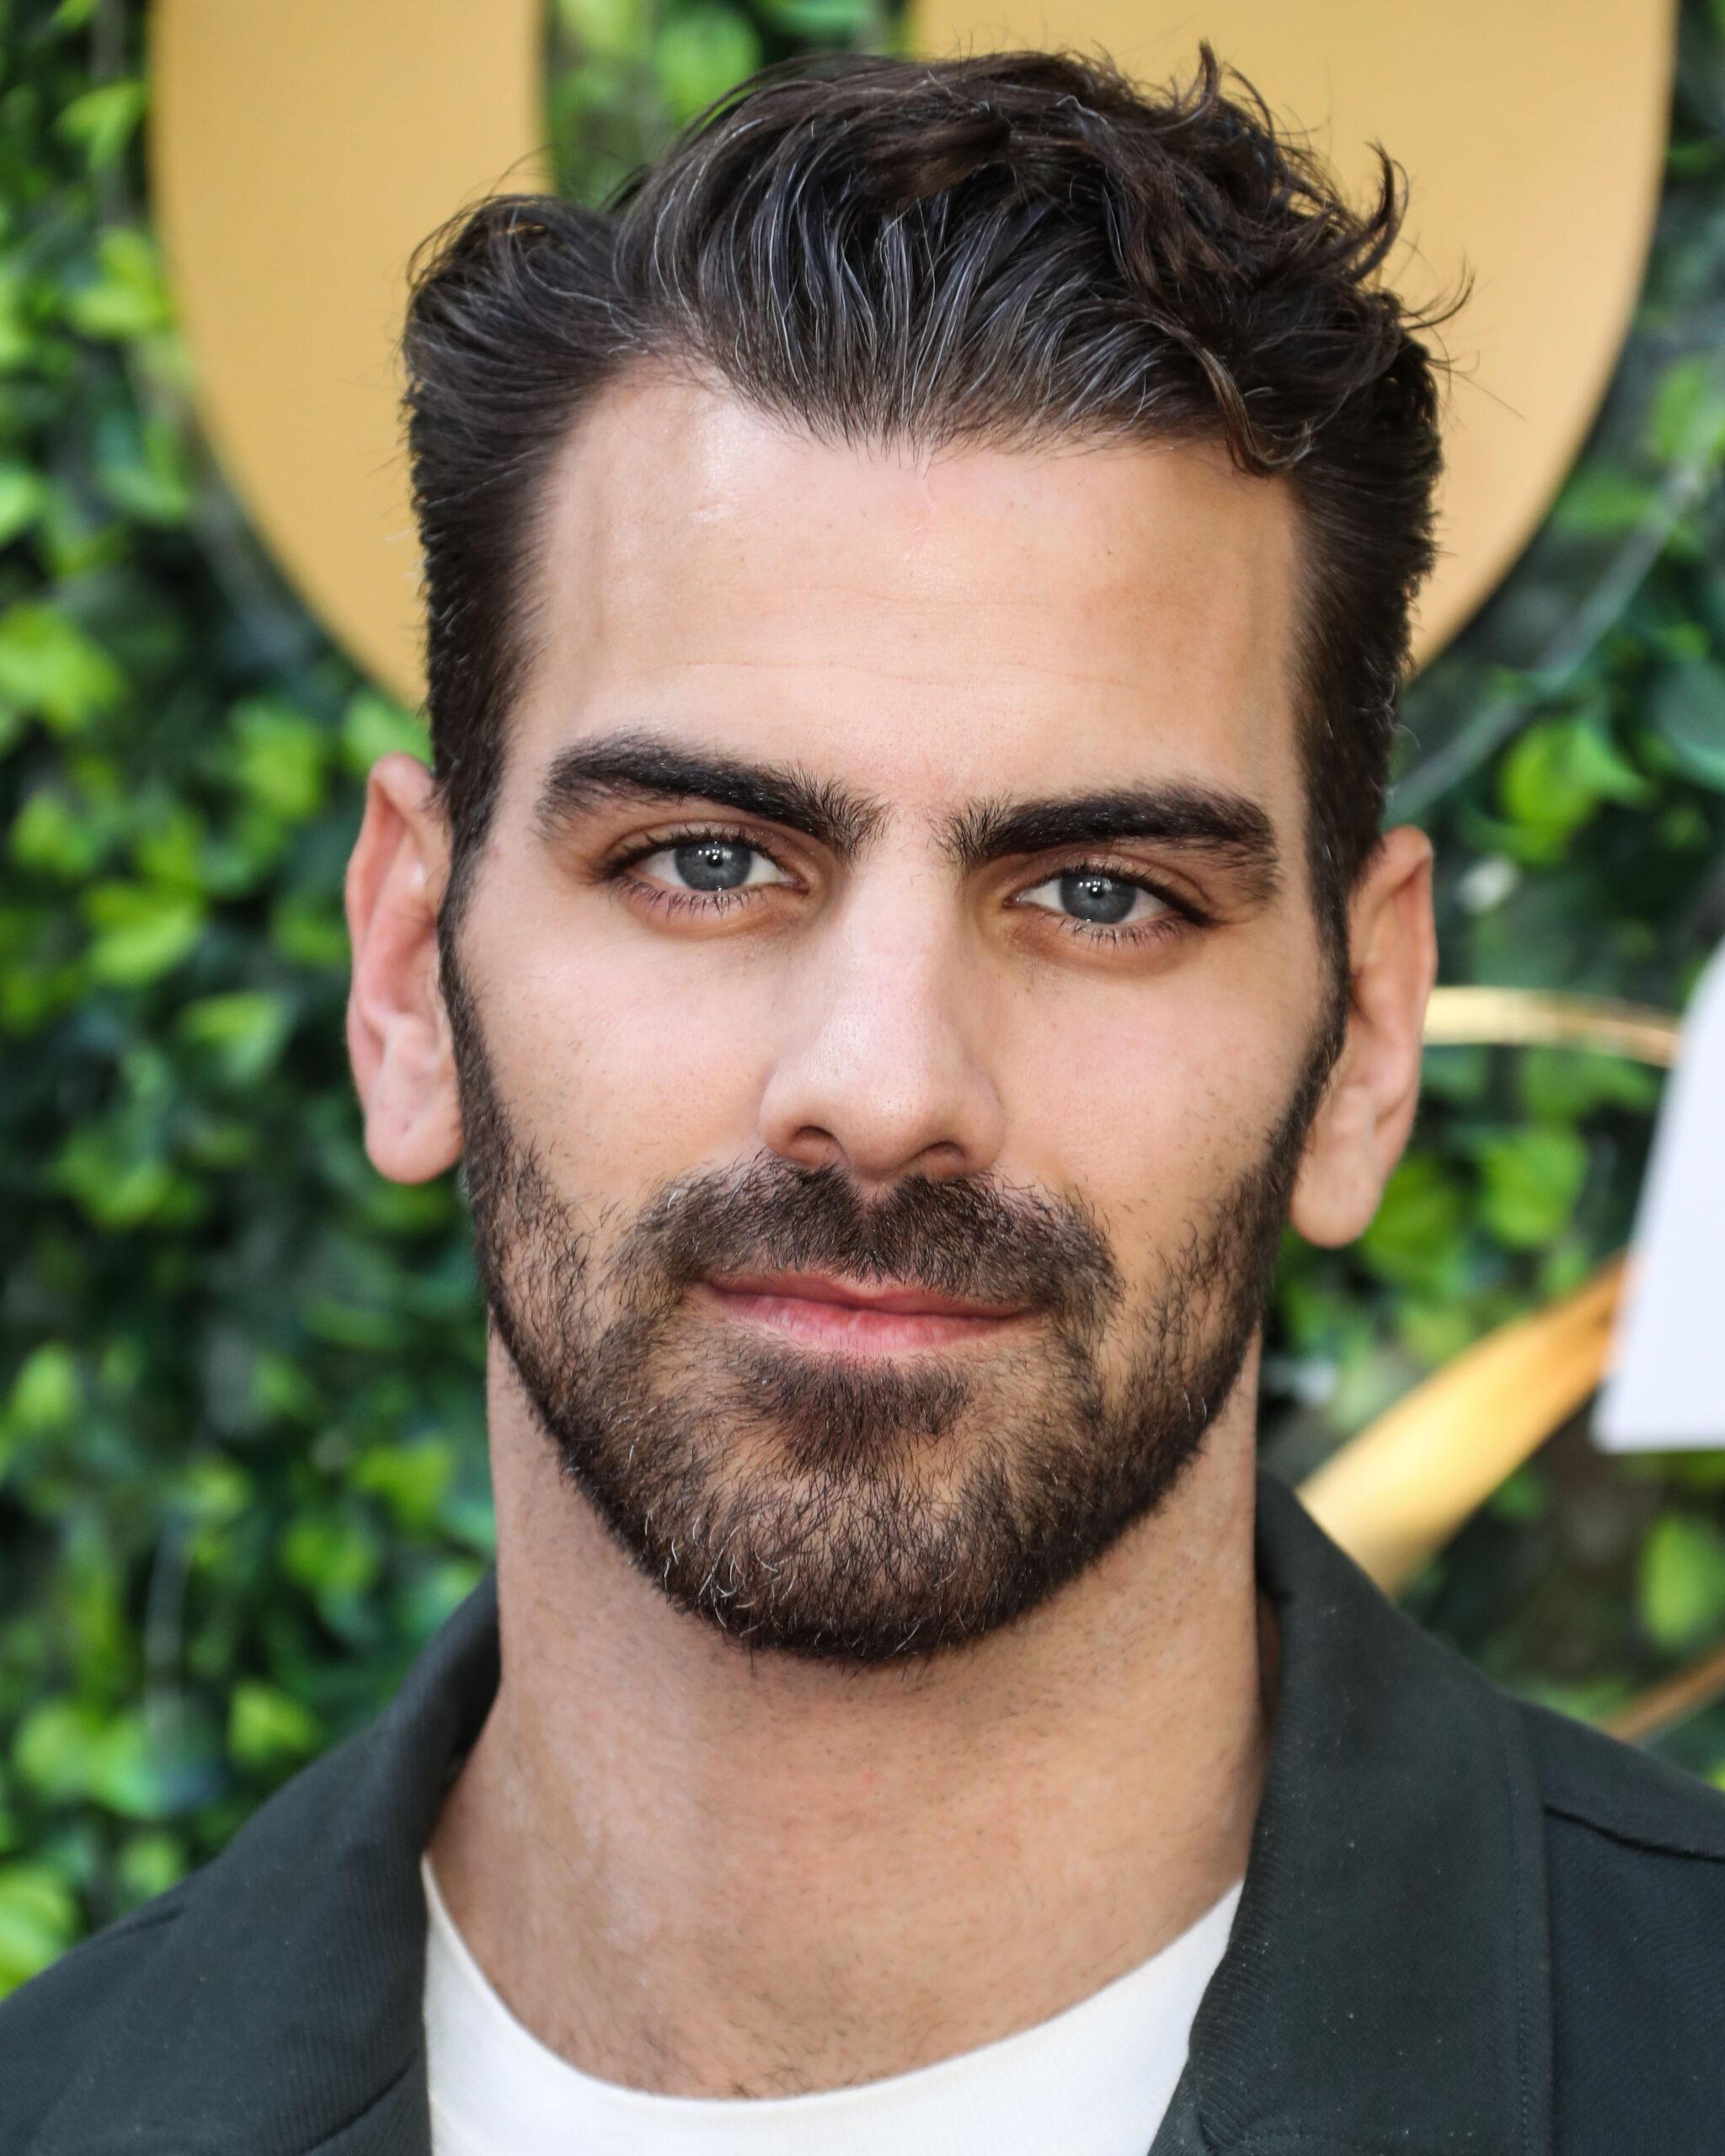 (FILE) Nyle DiMarco Says He 'Likely Contracted Coronavirus COVID-19' But Will Skip Testing to Help Others